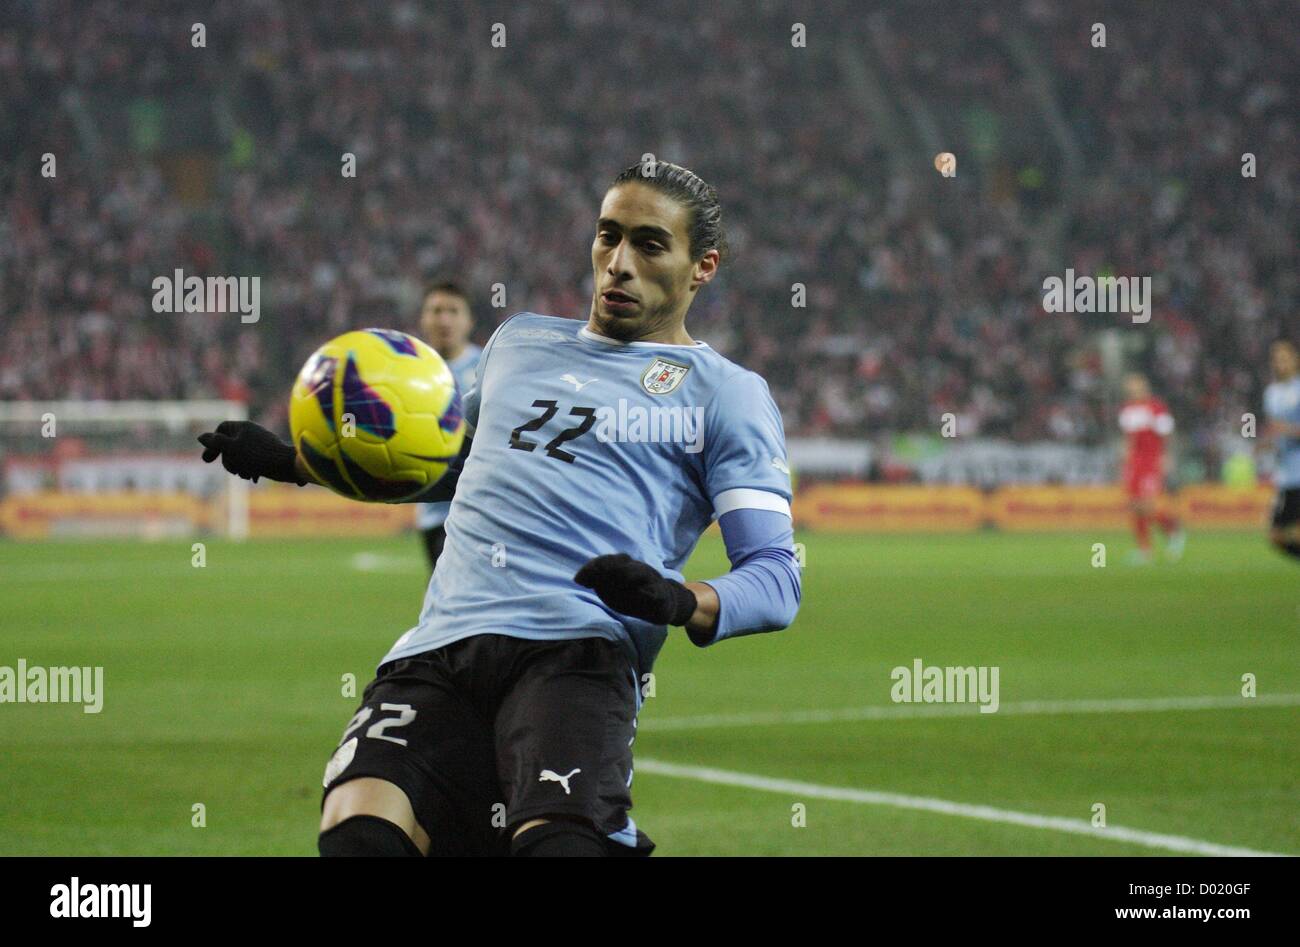 Gdansk, Poland 14th, November 2012   Poland v Uruguay football friendly game at PGE Arena stadium in Gdansk. Martin Caceres (22) in action during the game. Stock Photo